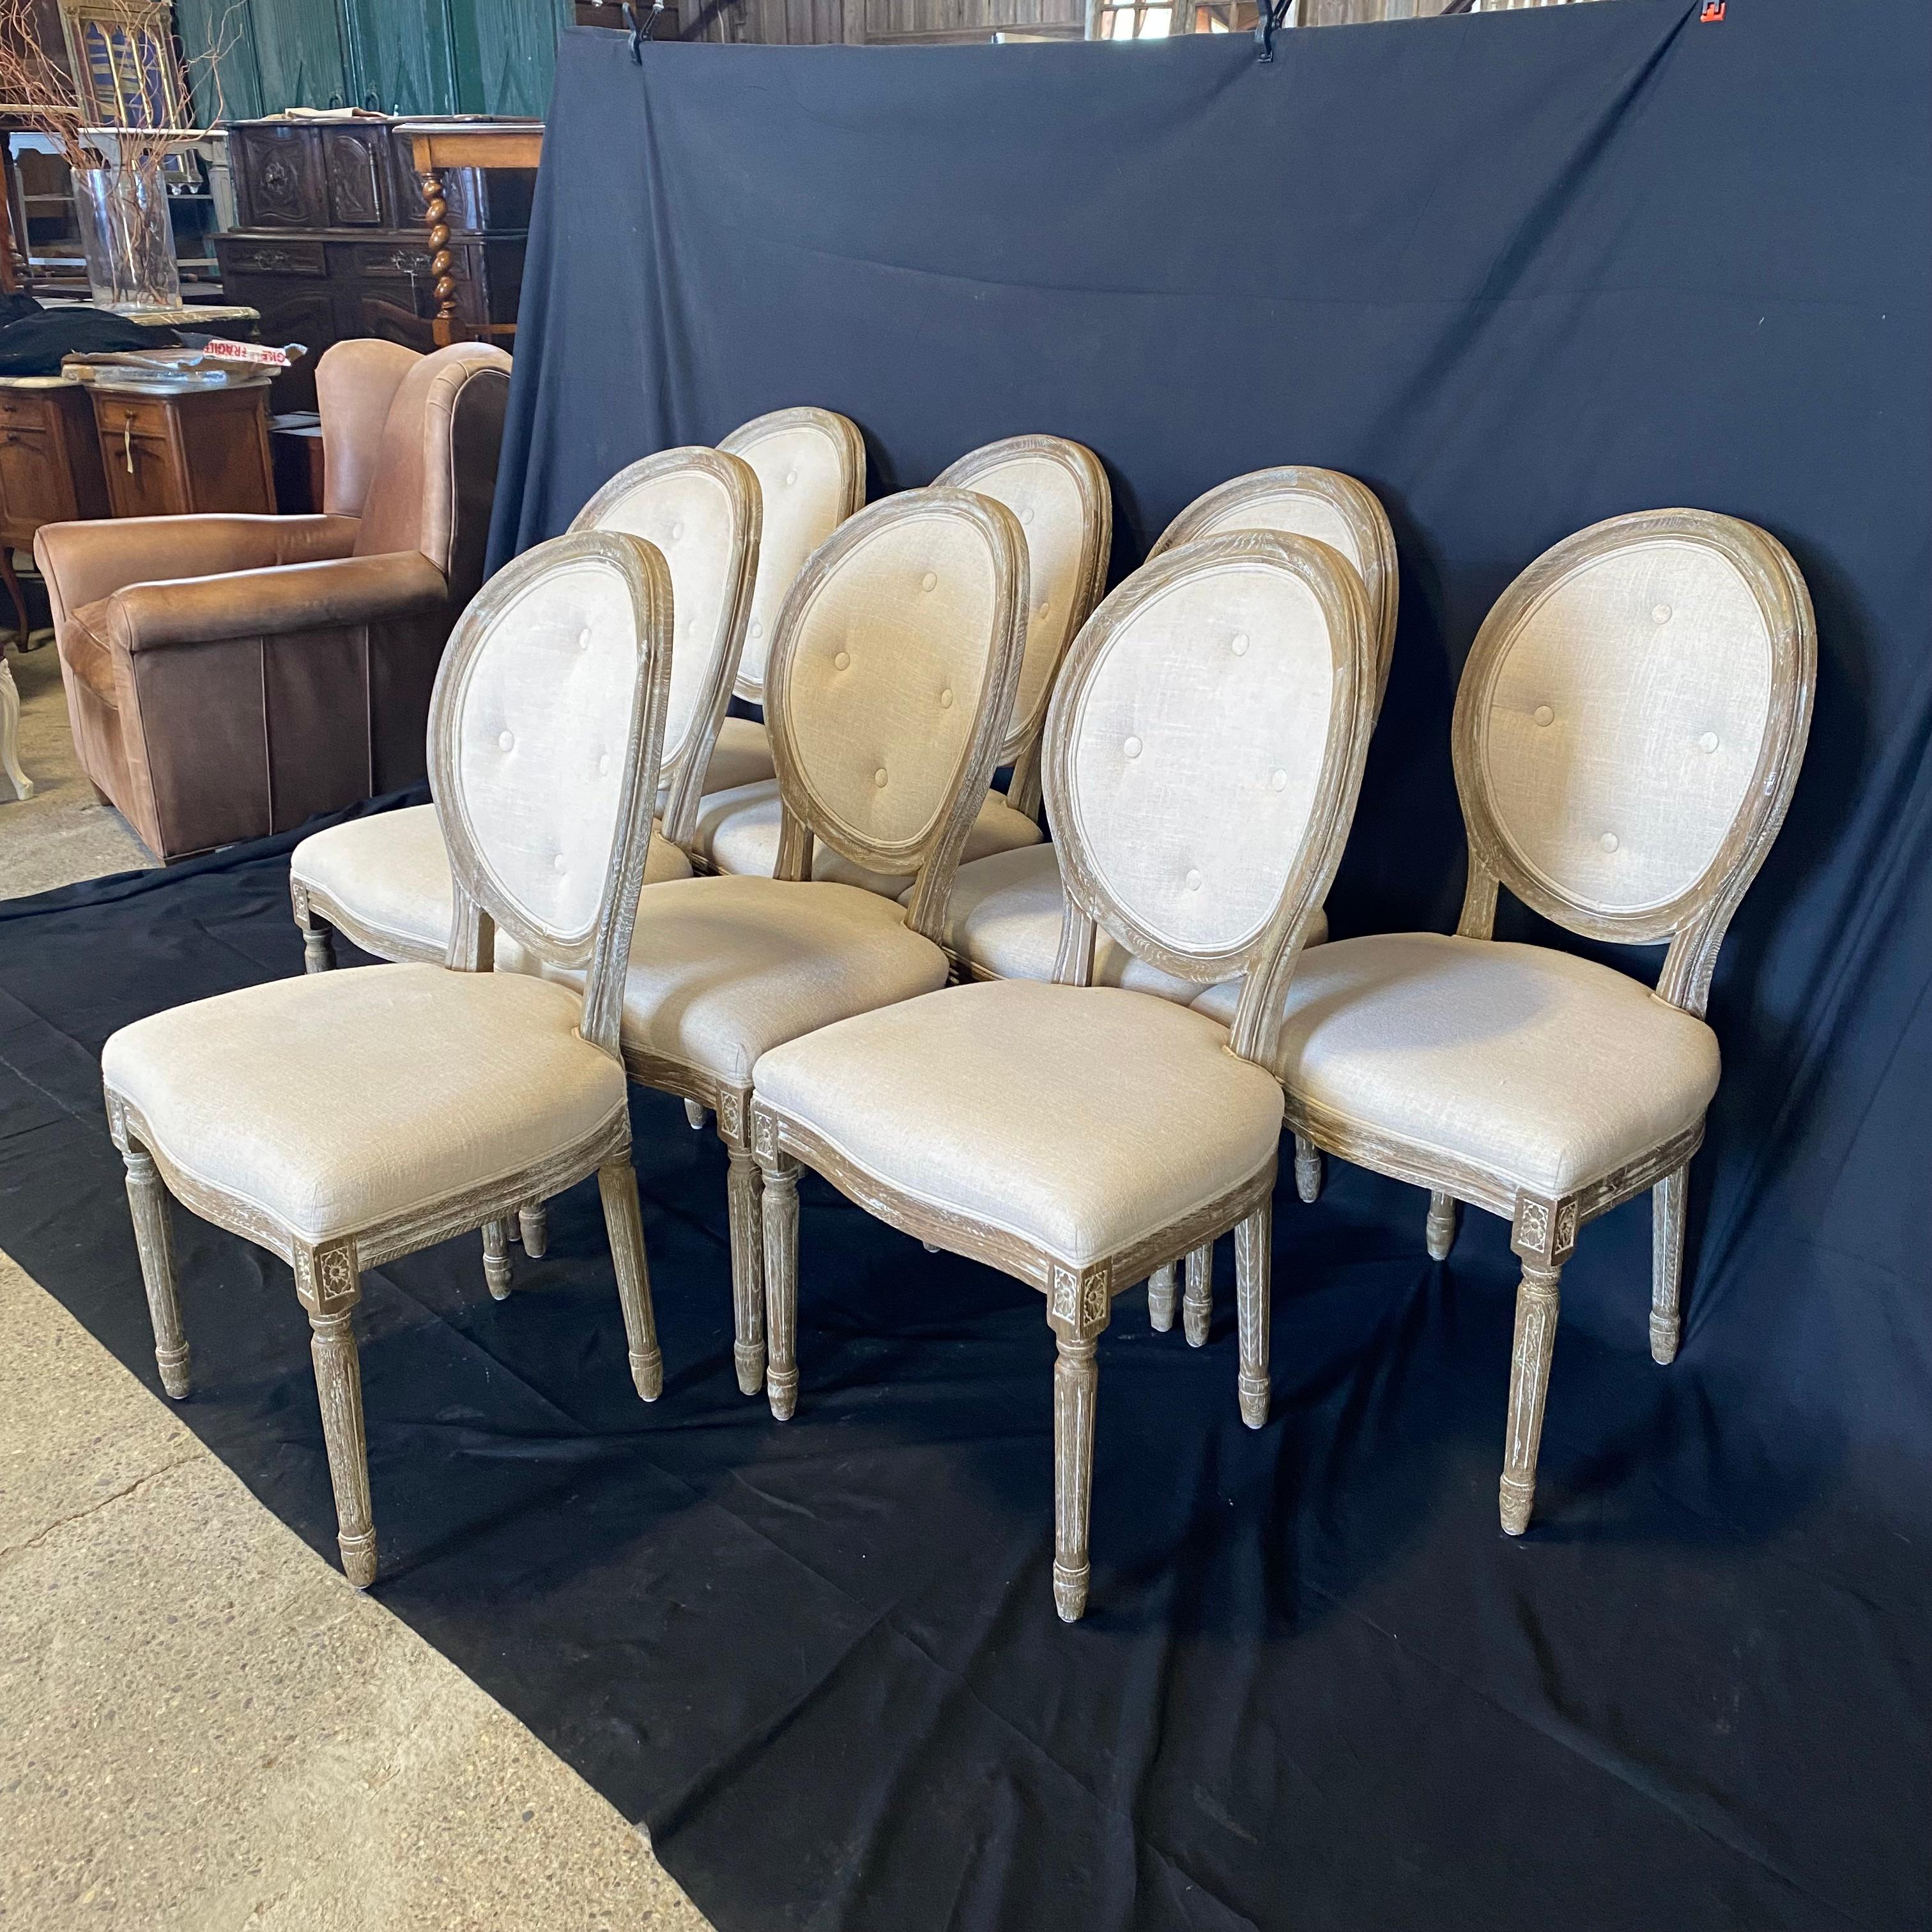 Really lovely set of eight dining chairs with tufted back and cerused oak in the classic style of Louis XVI.  In great condition and ready to add elegance to your dining room!
#5317